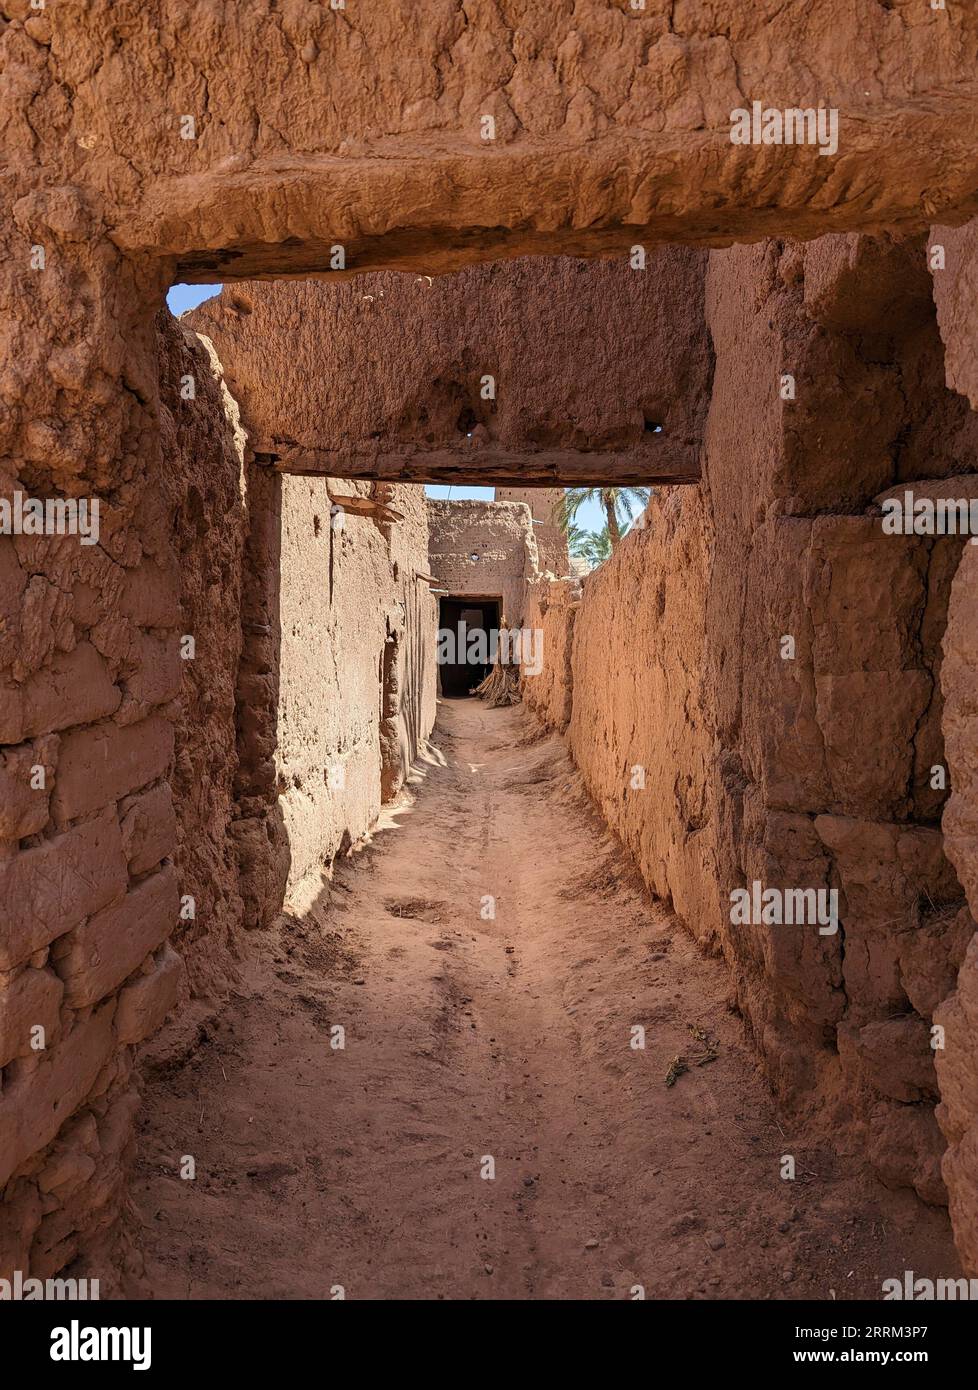 Typical abandoned alleyway surrounded by old clay walls in a little village somewhere in the Draa valley Stock Photo